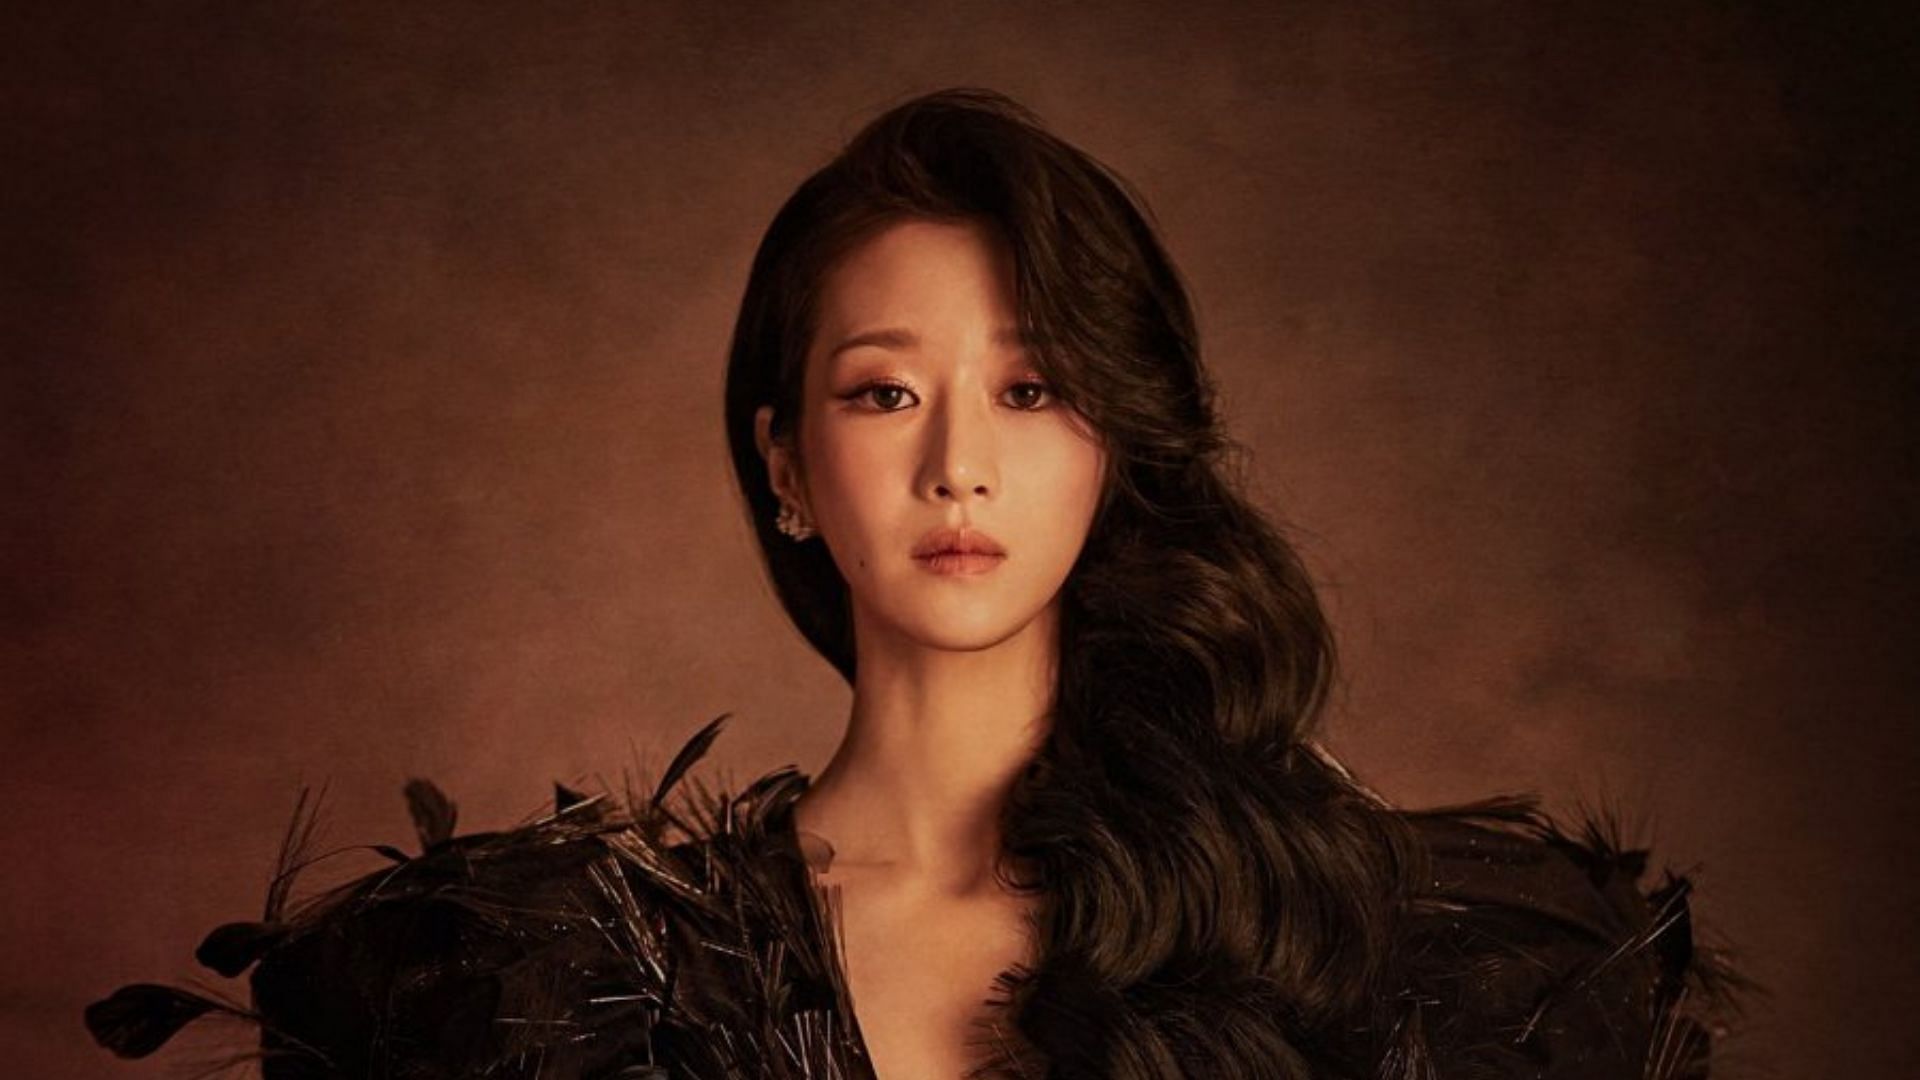 K Drama Eves New Poster Features Actor Seo Ye Ji In A Regal Pose 3949